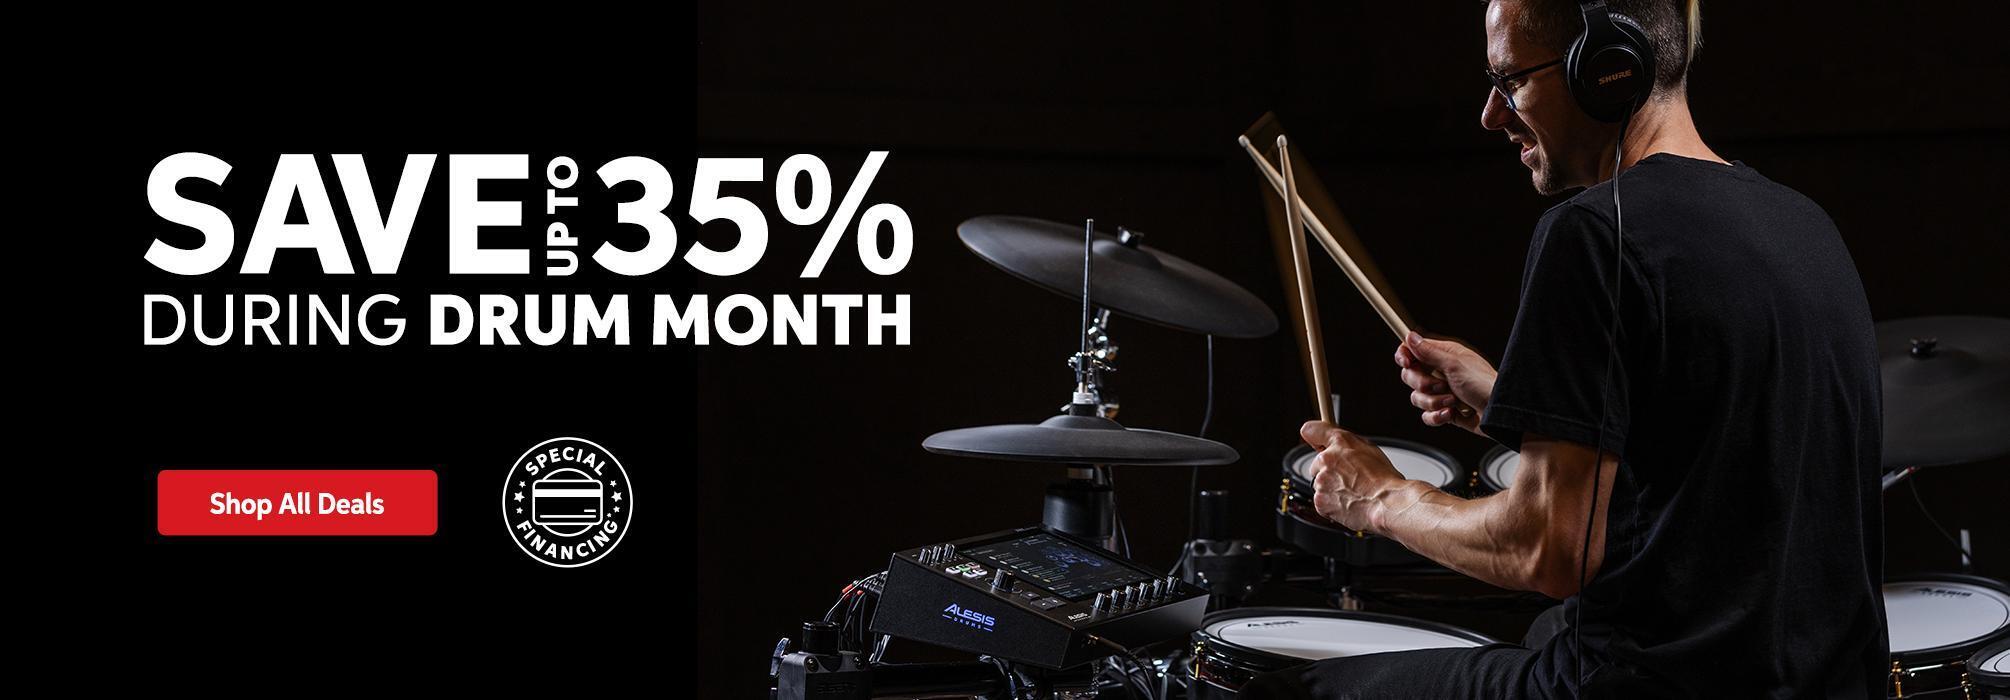 Save up to 35% during Drum Month